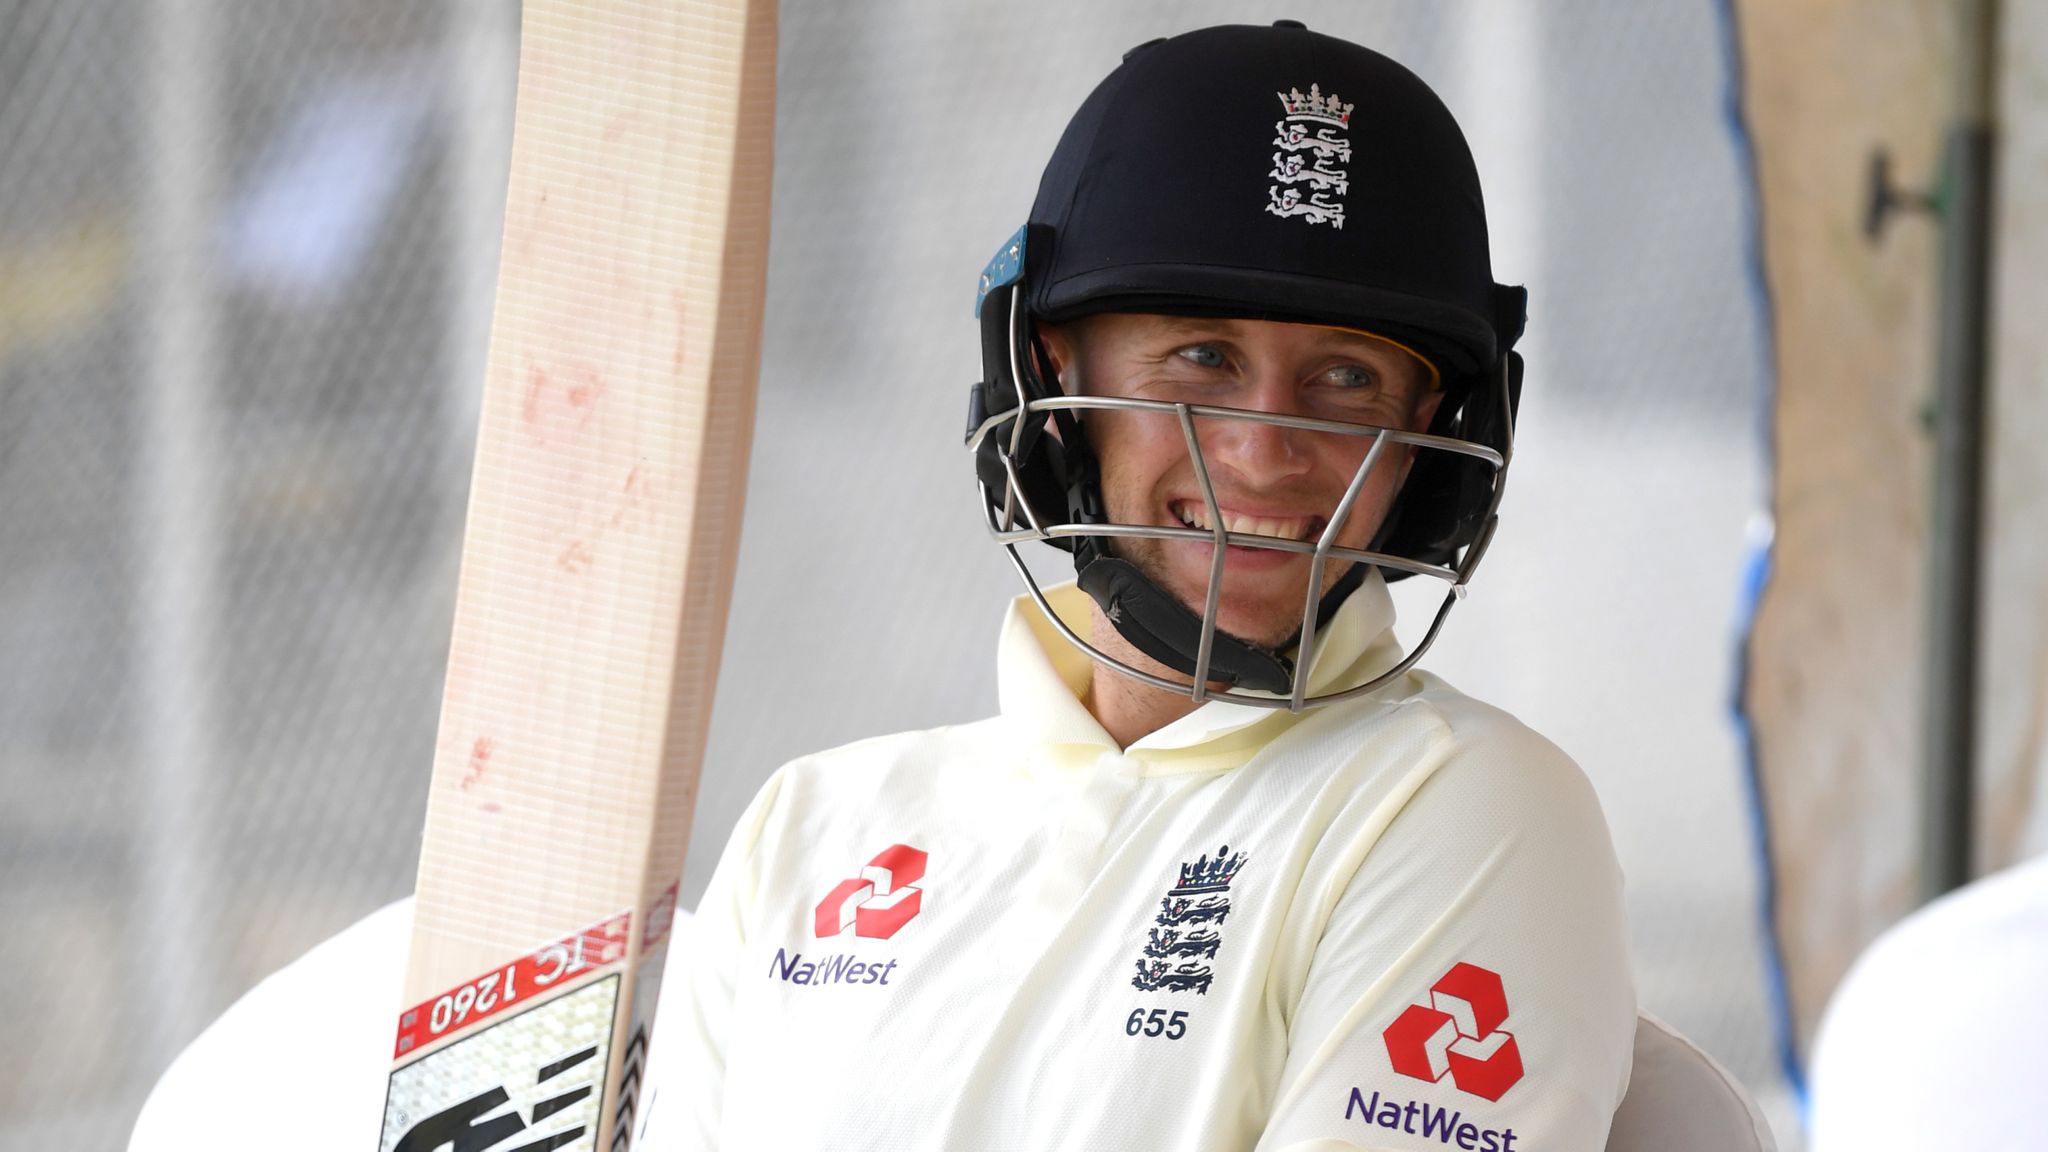 Ashes: England Captain Joe Root opens up on upcoming challenge in Australia, says, ‘It will define my captaincy’